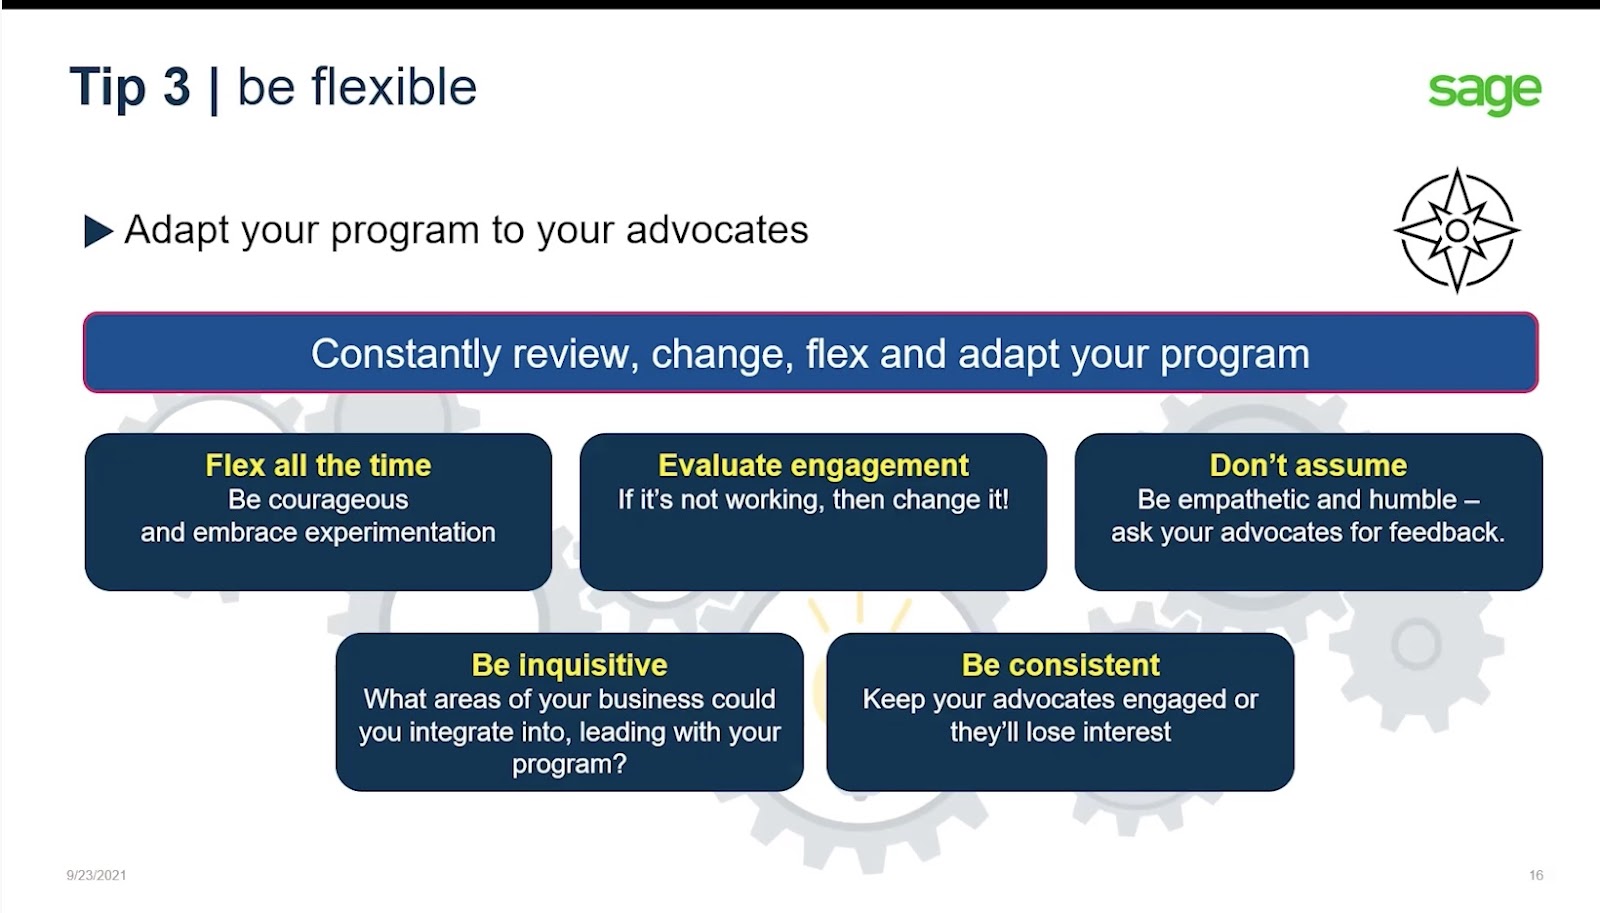 A statement which says "Adapt your program to your advocates, constantly review, change, flex and adapt your program" and then five points which say "Flex all the time: be courageous and embrace experimentation", "evaluate engagement, if its not working, then change it!". "dont addume, be empathetic and humble, ask your advocates for feedback", "be inquisitive, what areas of your business could you integrate into, leading with your program?" and finally "be consistent, keep your advocates engaged or theyll lose interest". 